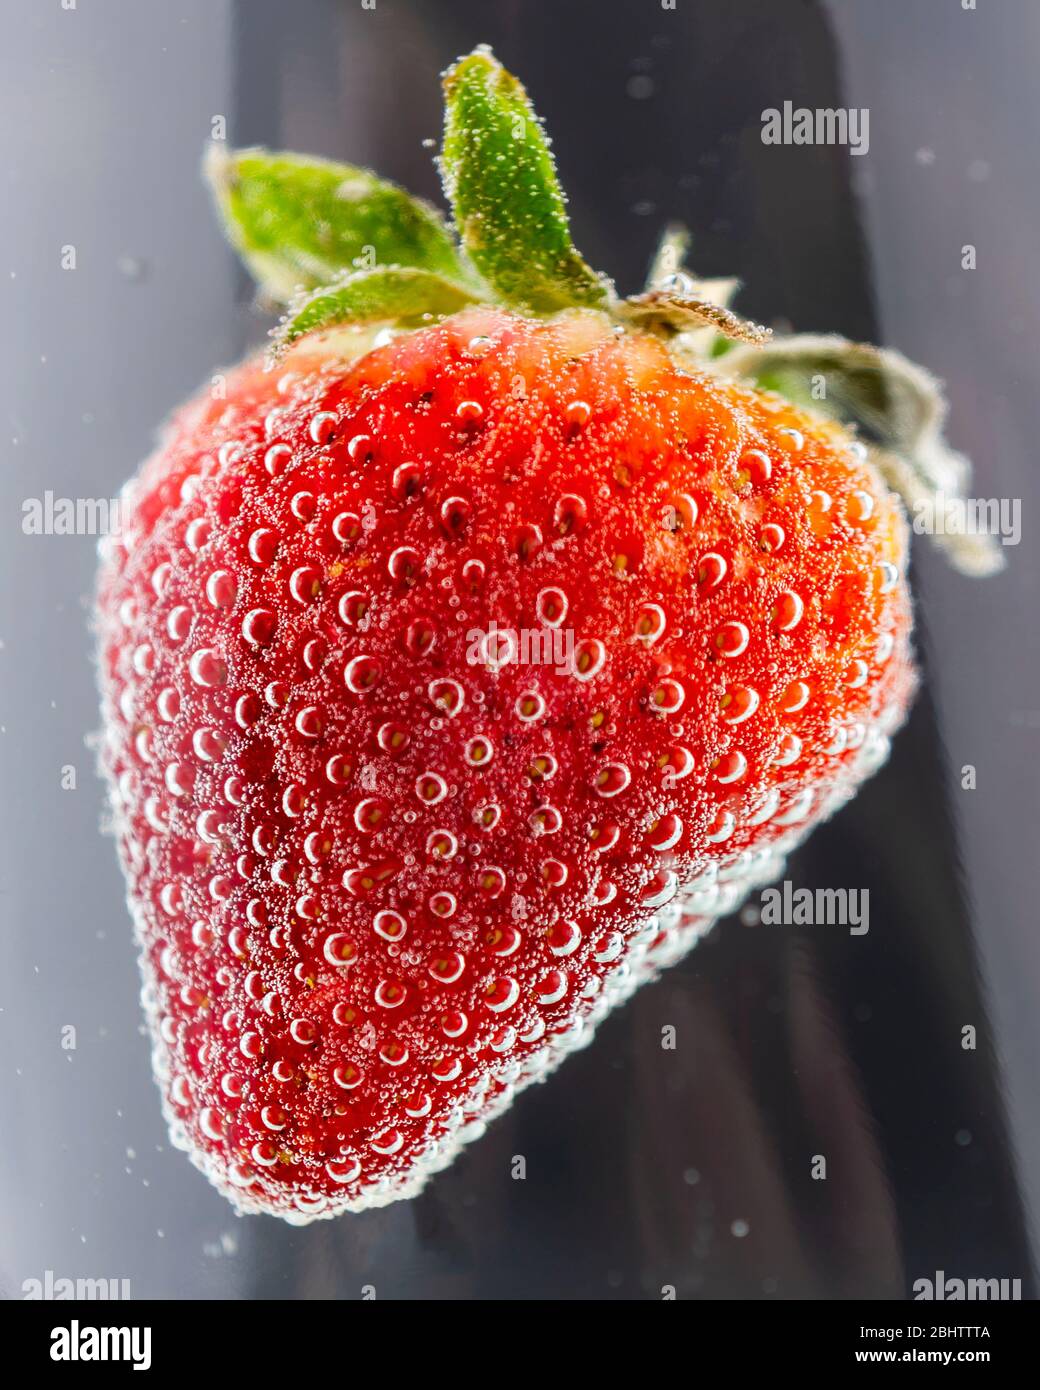 A ripe red strawberry submerged in a clear liquid with lots of bubbles.  Abstract reflections on the glass container. Stock Photo